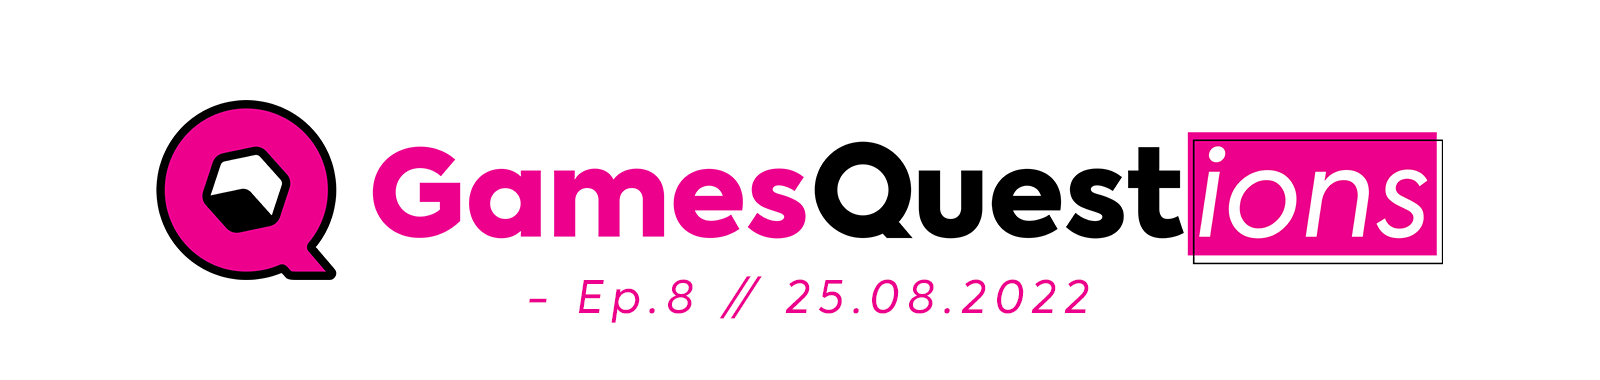 GamesQuestions Ep.8 // 25.08.2022